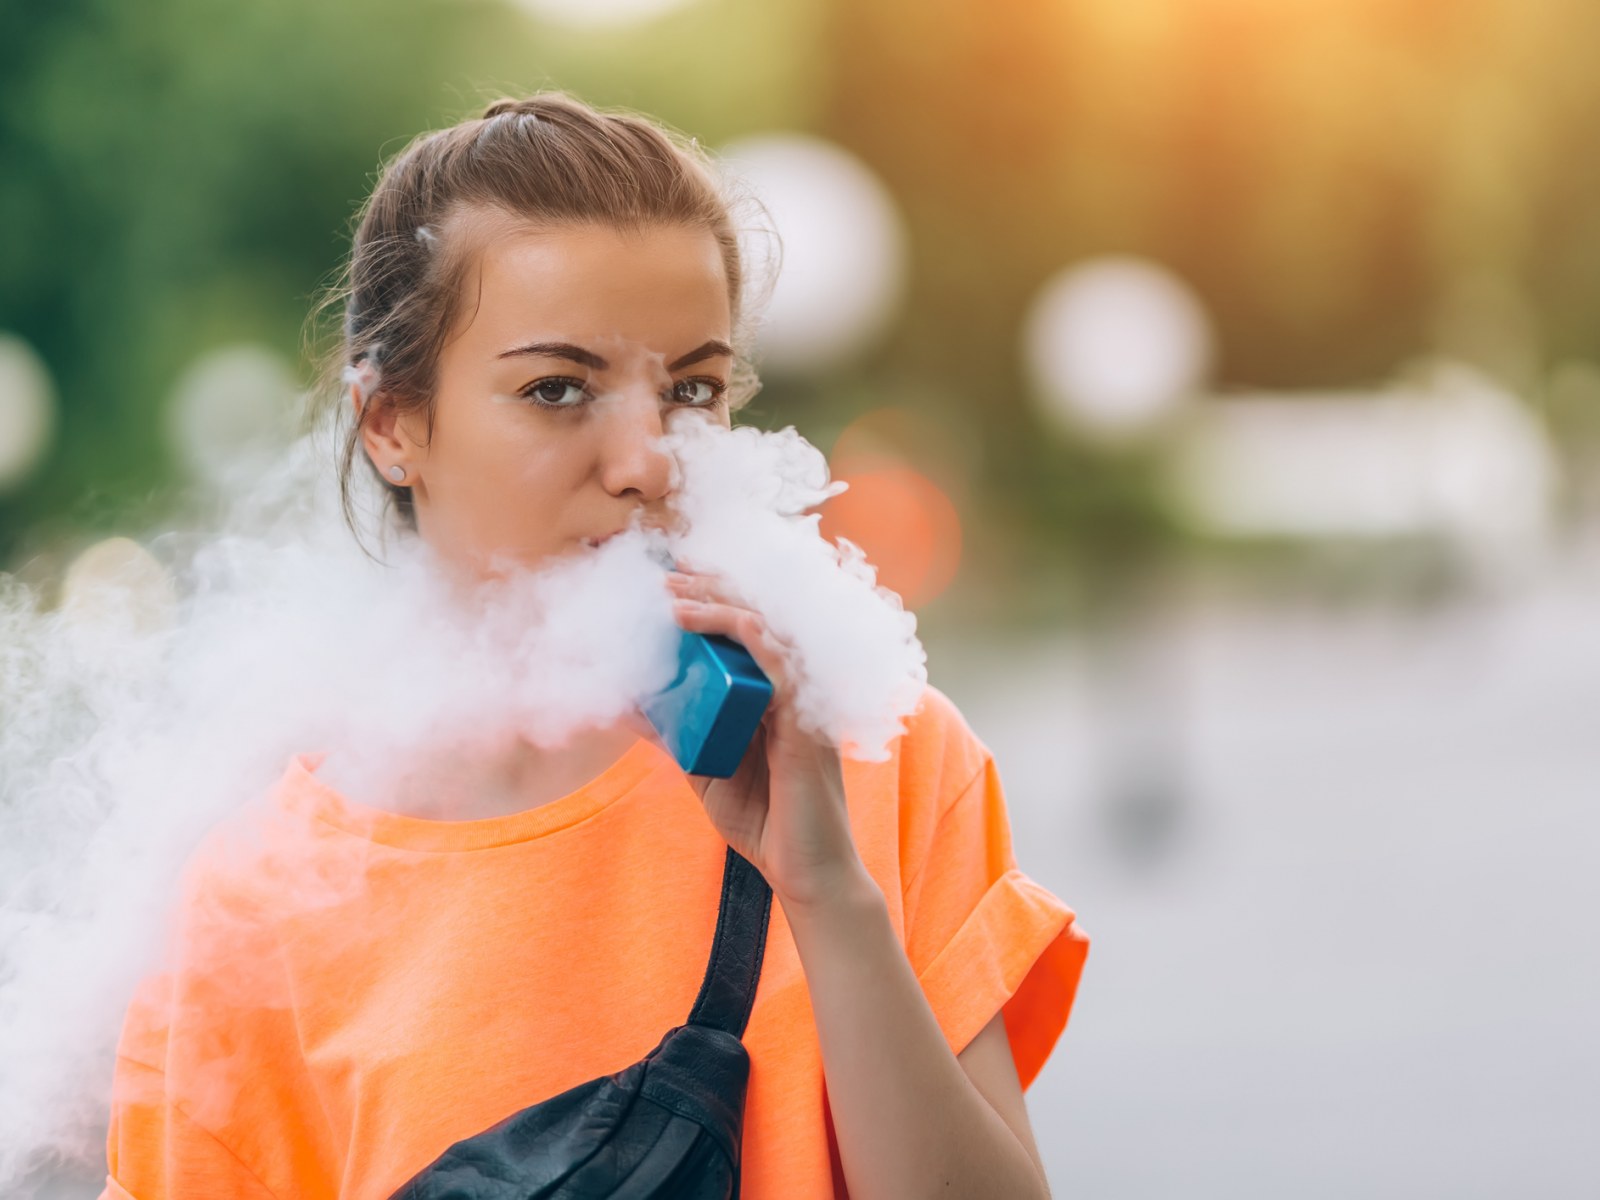 Teens Who Use Flavored E-cigarettes More Likely to Keep Vaping, Take More Puffs